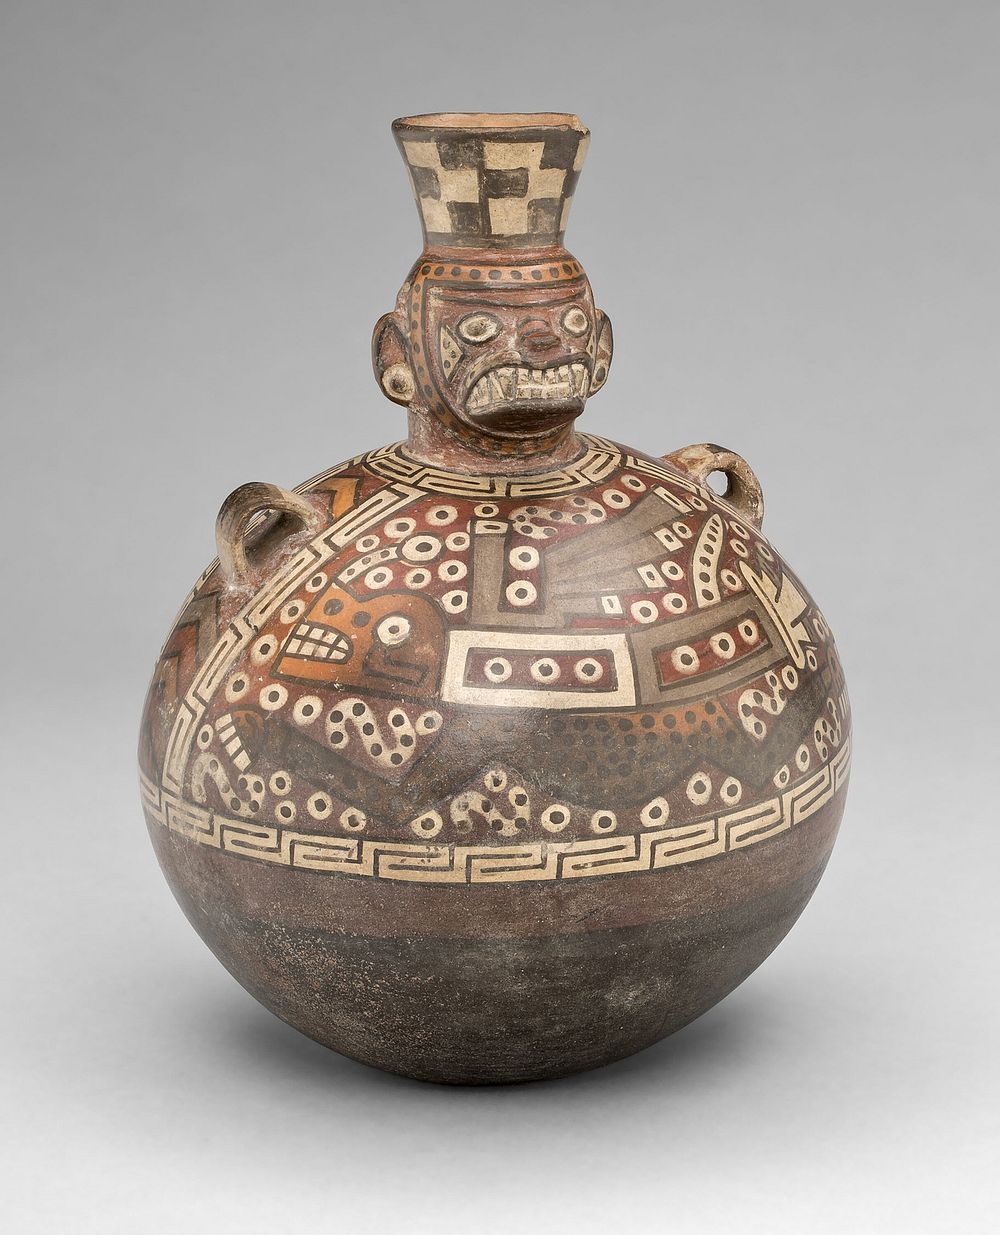 Bottle with a Masked Figure and Abstract Feline and Textile Motifs by Tiwanaku